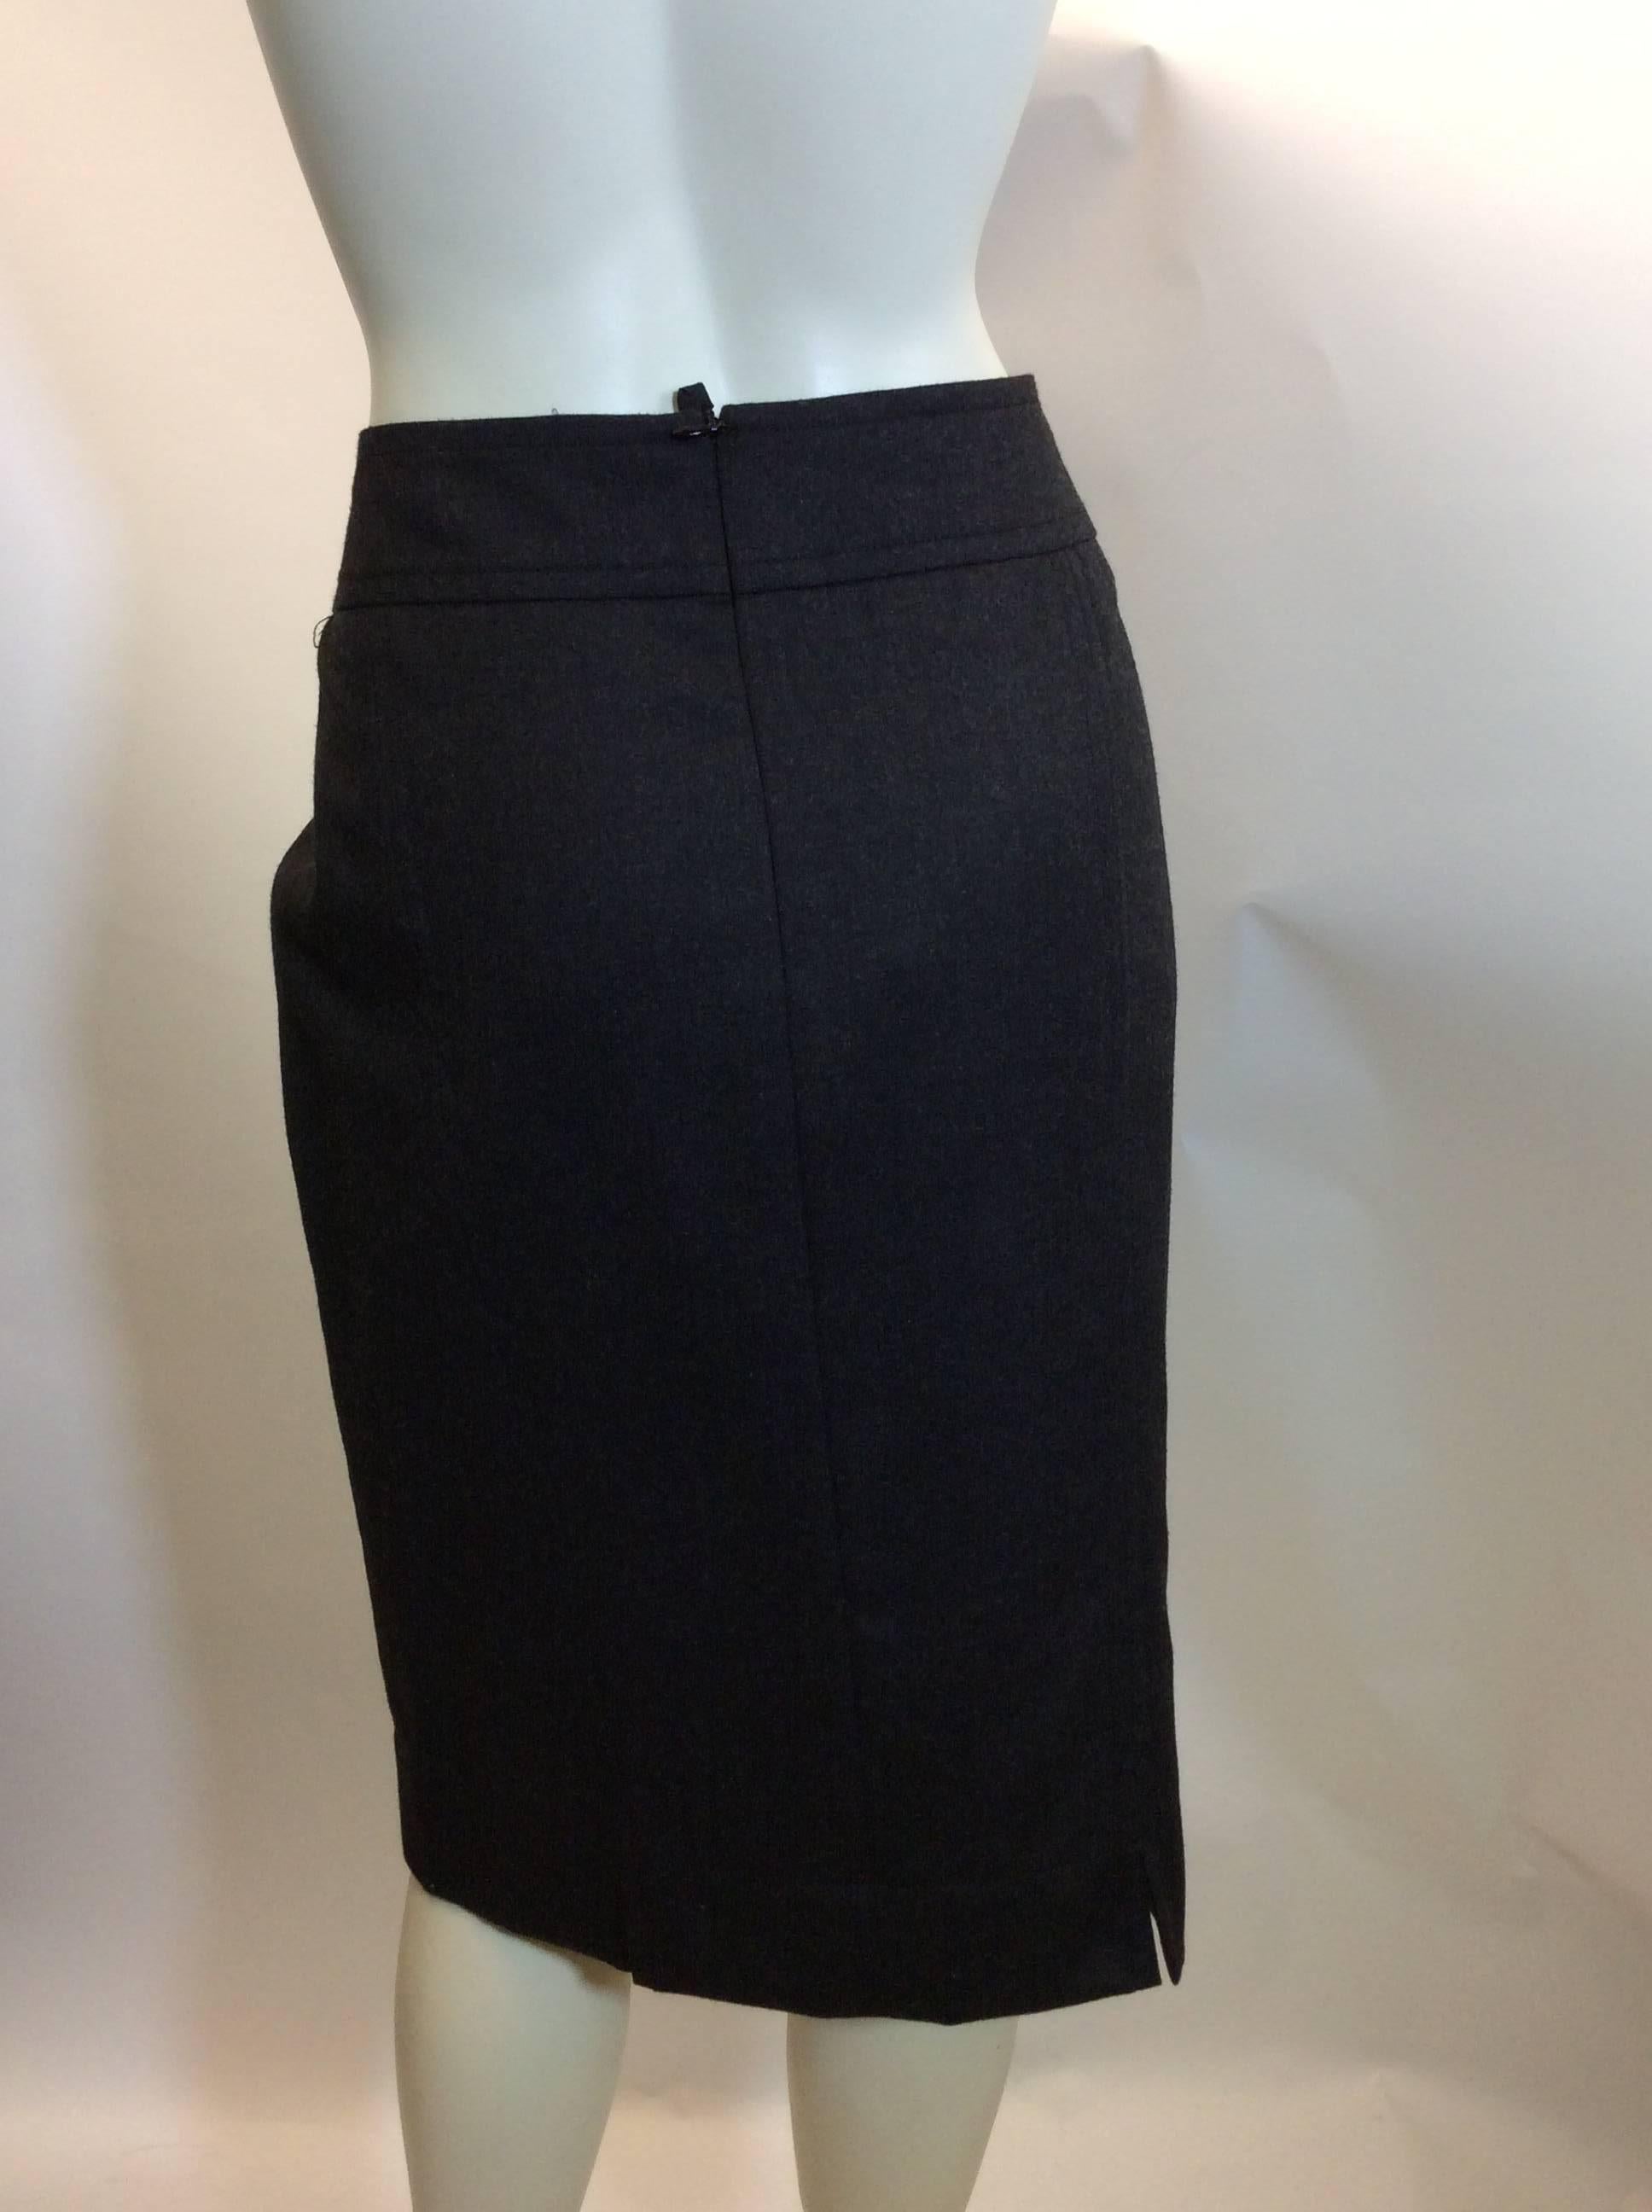 Akris Punto Gray Skirt In Excellent Condition For Sale In Narberth, PA